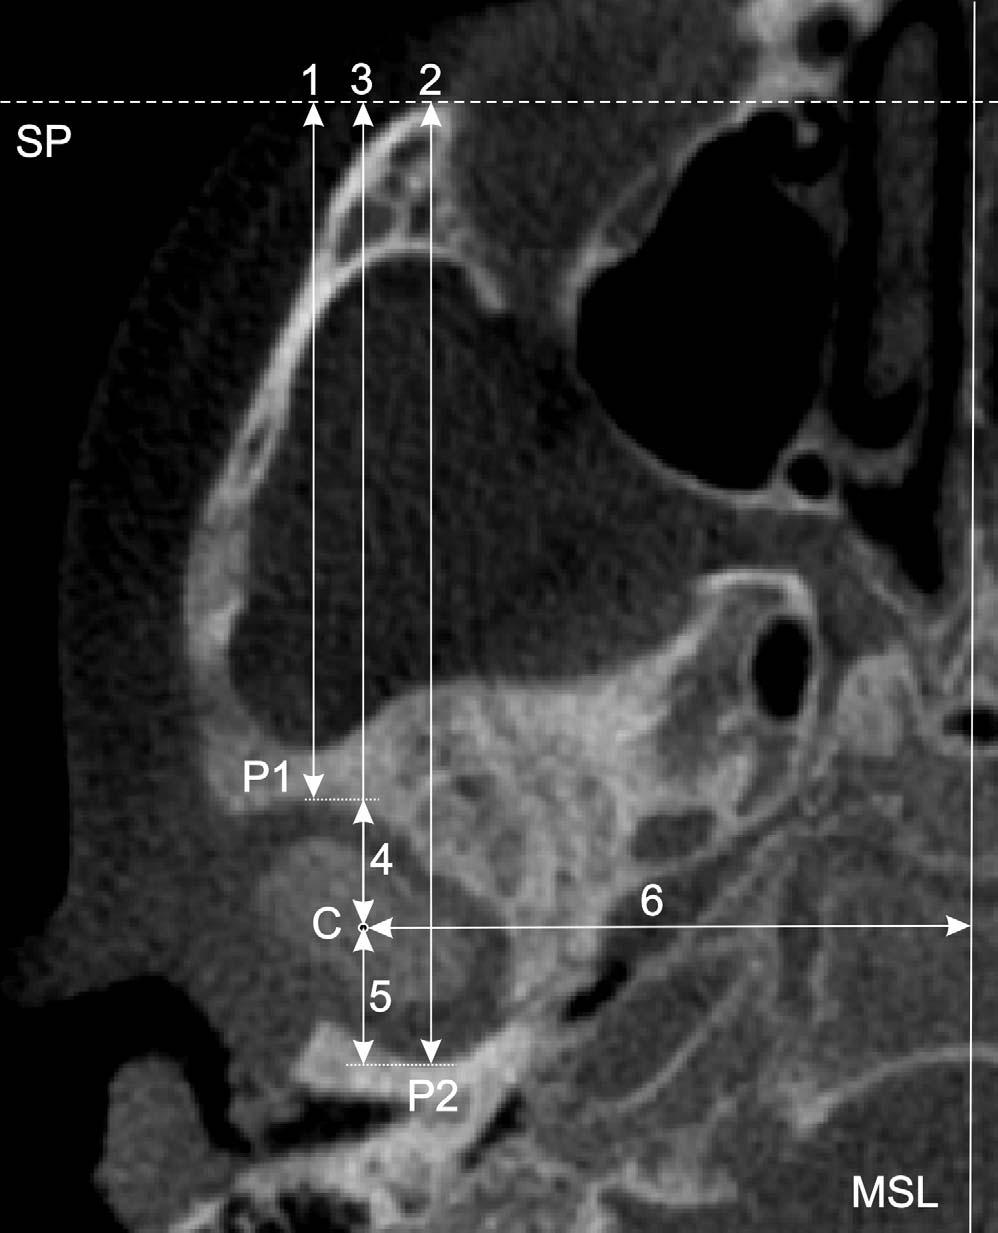 P1 ws locted in the most nterior internl contour of the glenoid foss nterior wll; P2 ws locted in the most posterior internl contour of the glenoid foss posterior wll; nd C ws the geometric center of